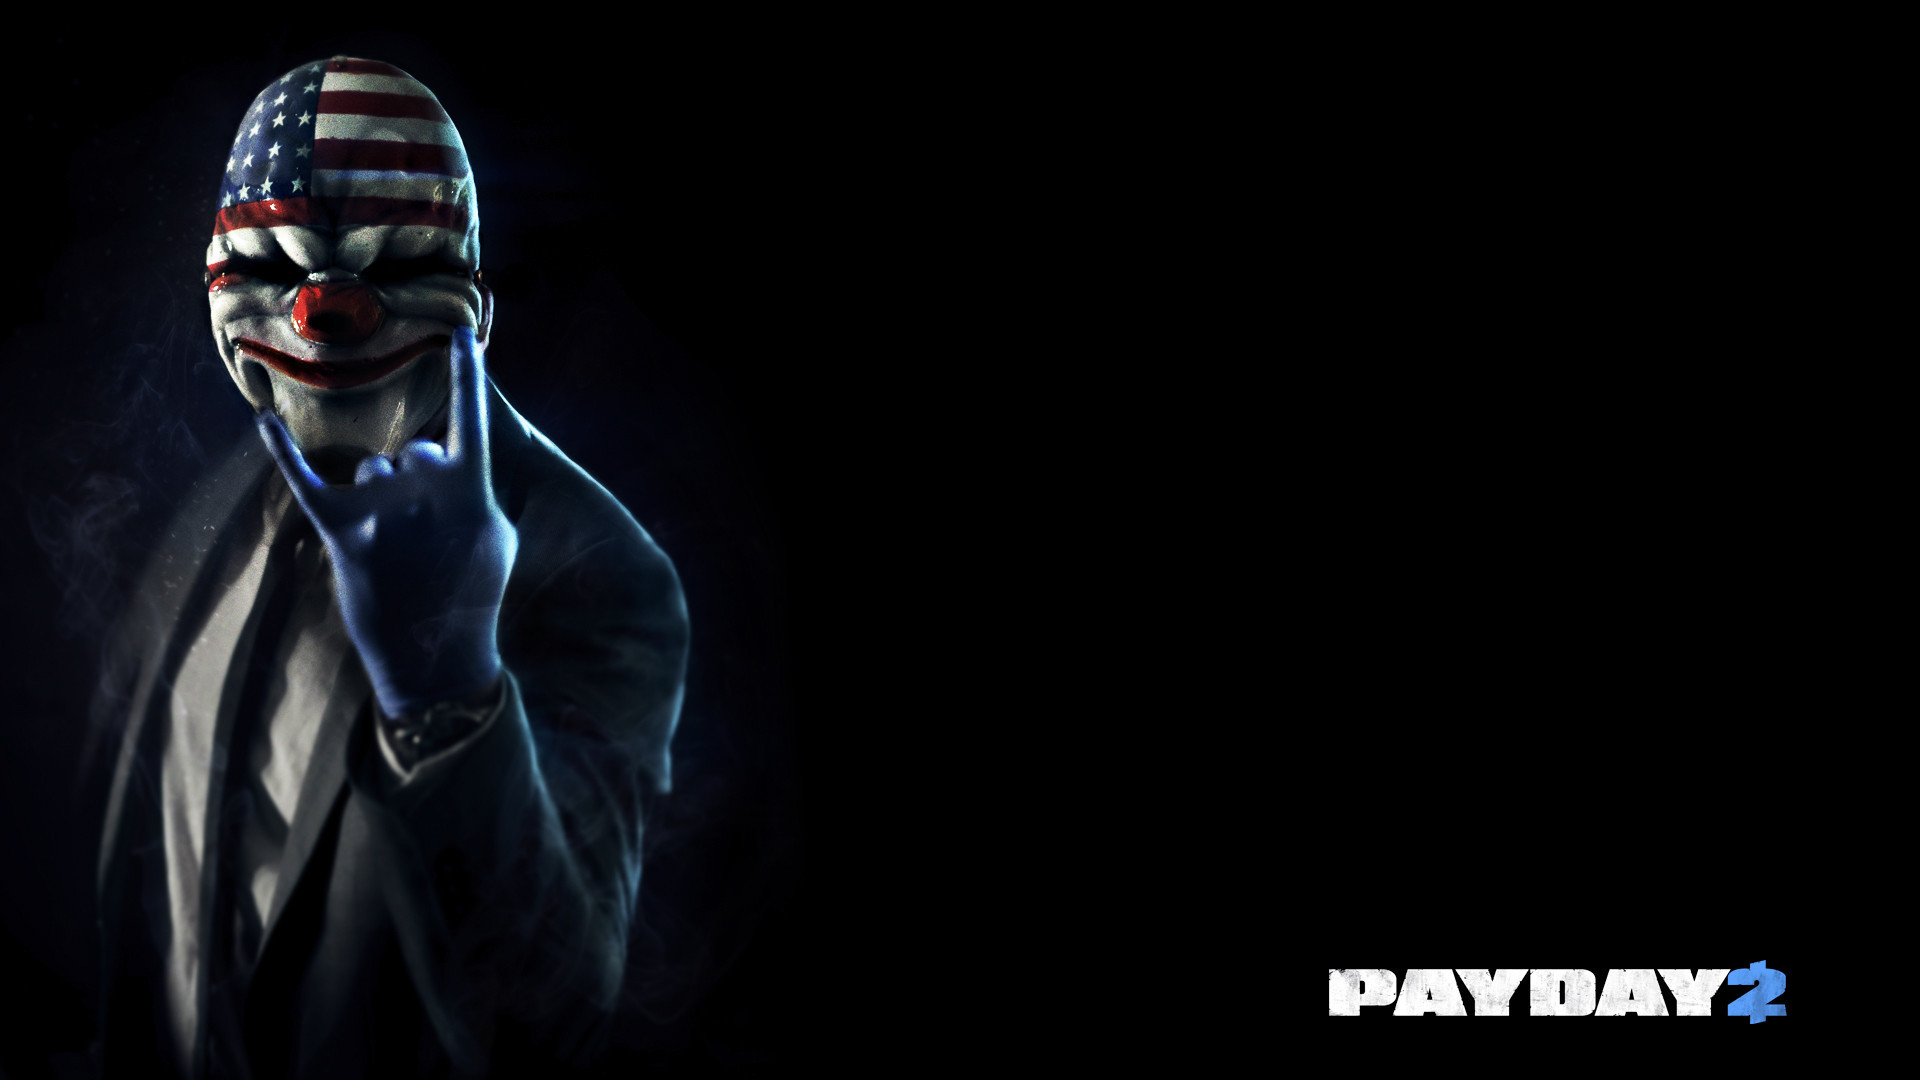 1920x1080 Video Game - Payday 2 Payday Dallas (Payday) Wallpaper